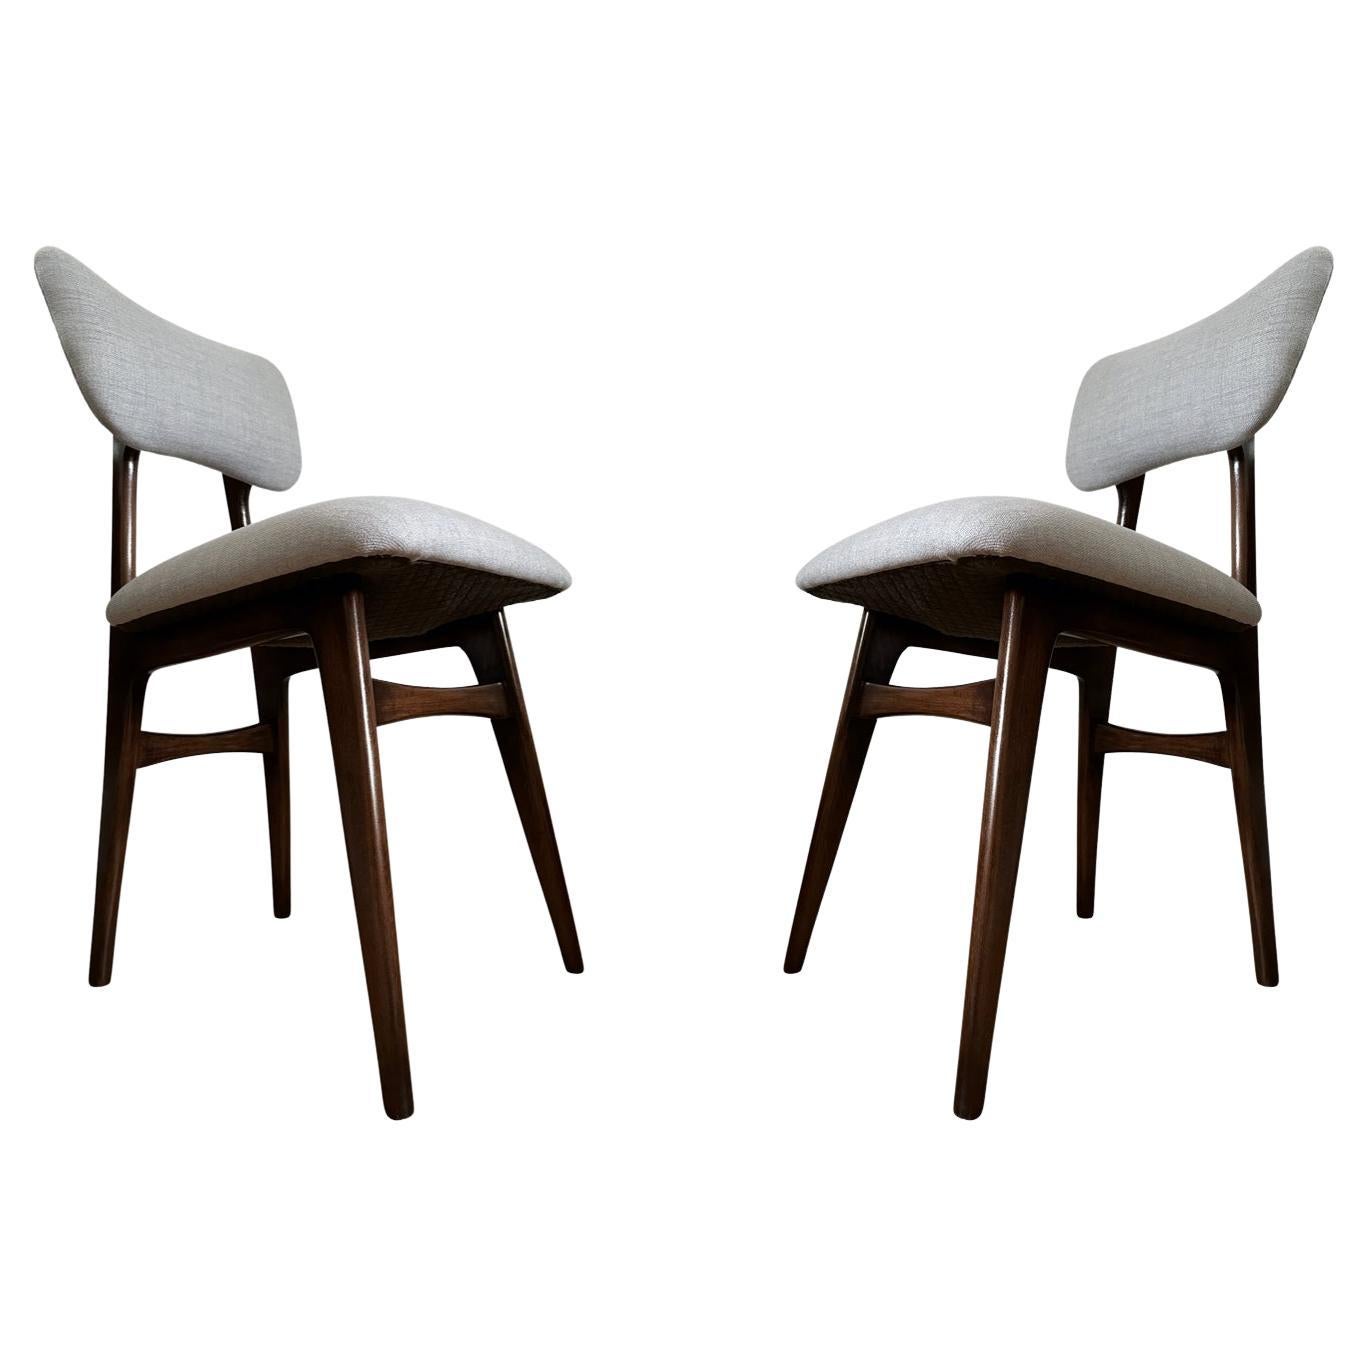 Set of 2 Midcentury Grey Dining Chairs, Europe, 1960s For Sale